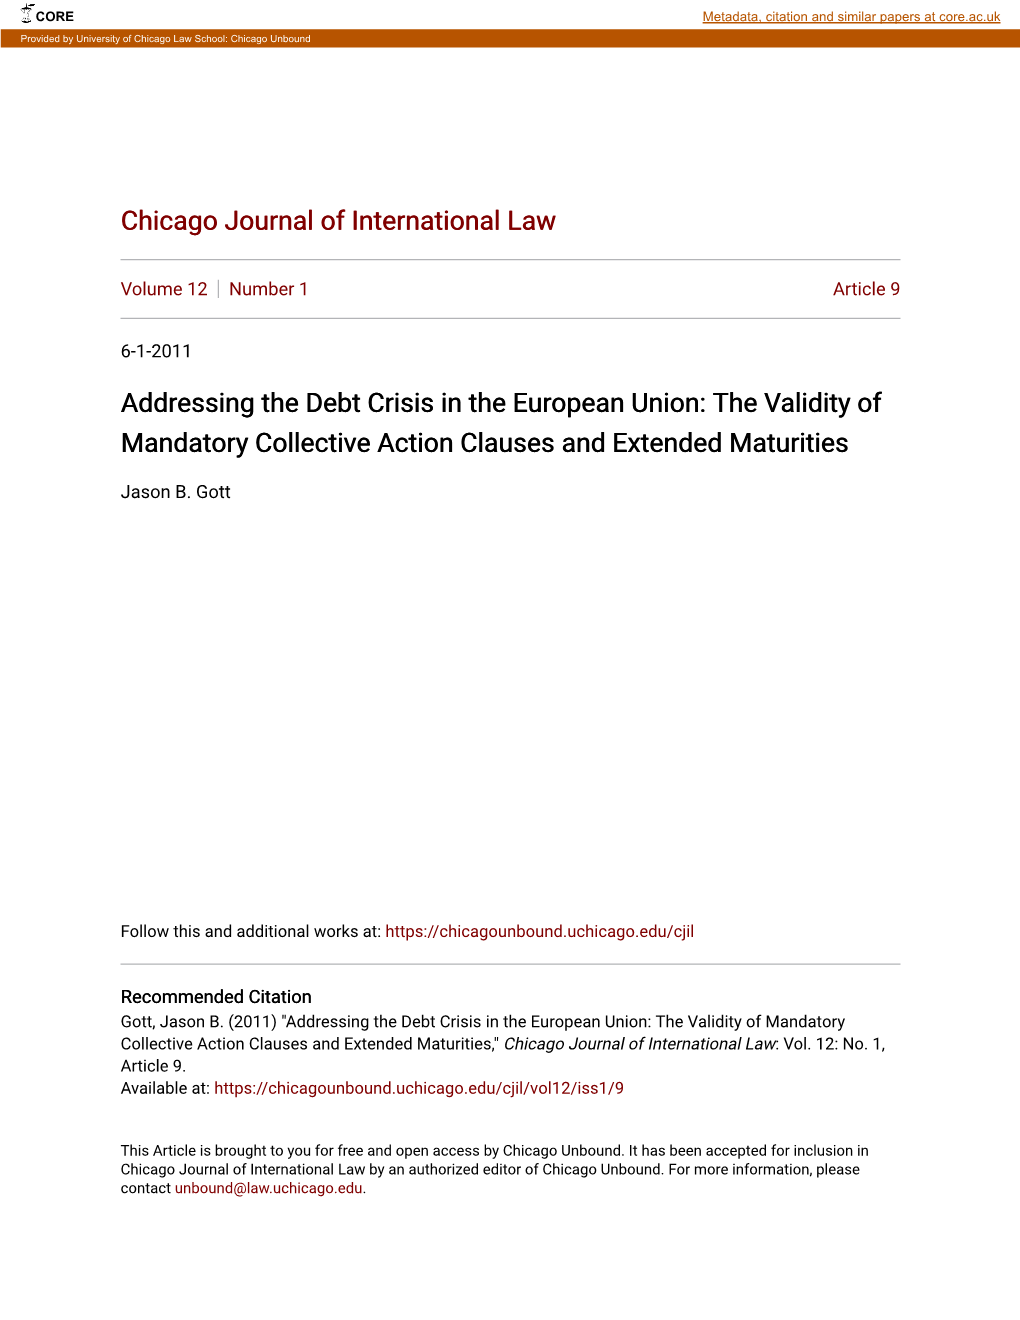 Addressing the Debt Crisis in the European Union: the Validity of Mandatory Collective Action Clauses and Extended Maturities